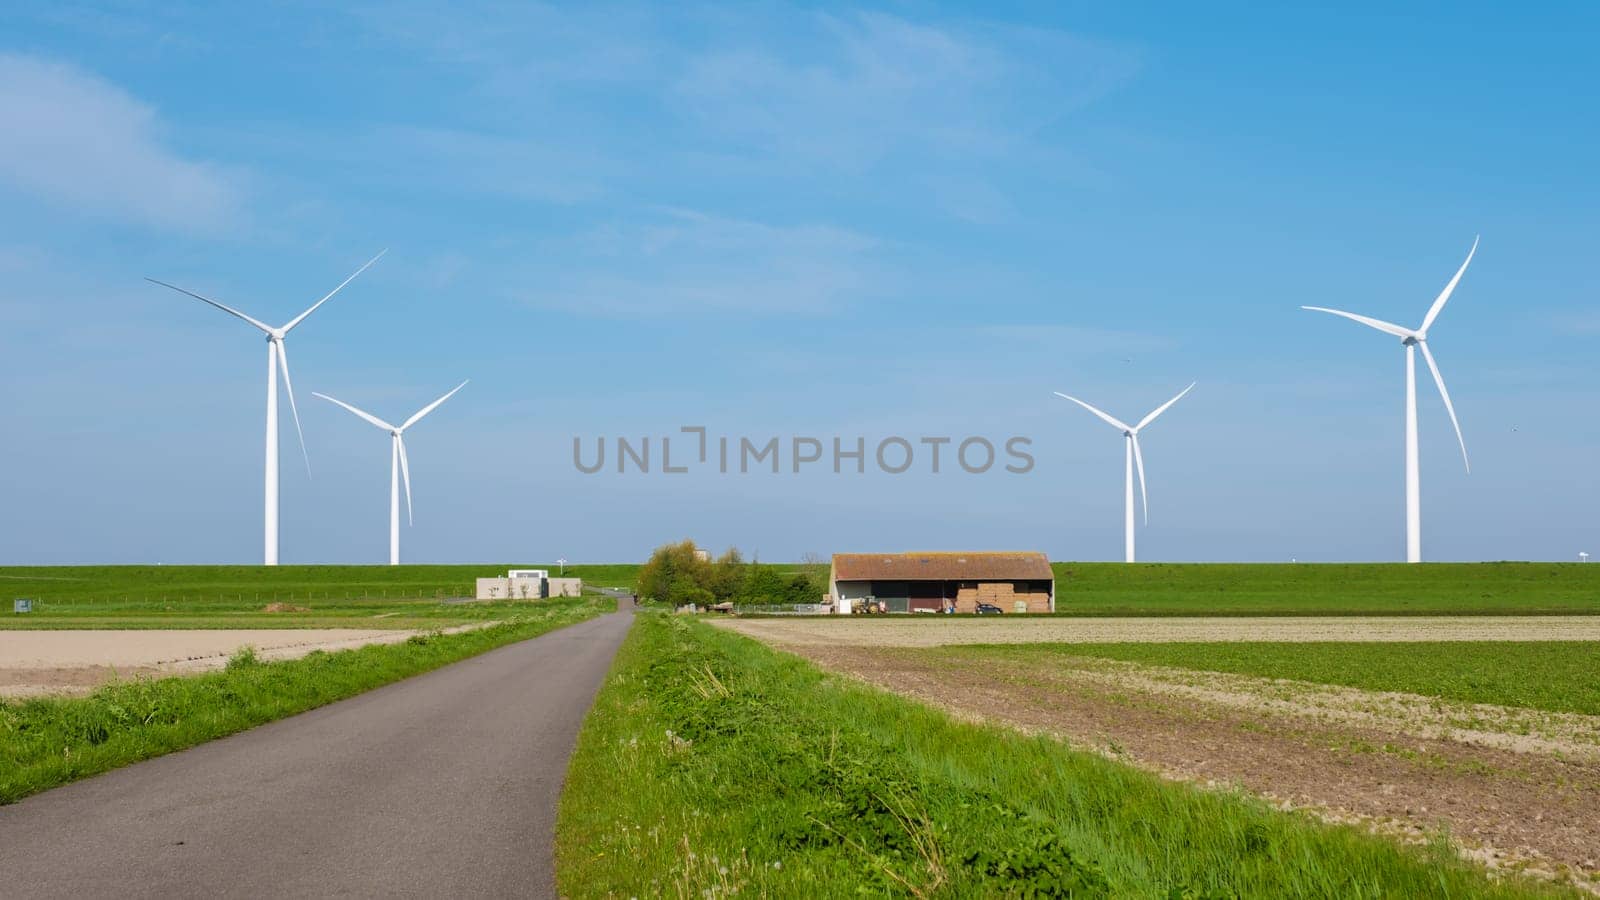 A scenic road winds through a vast field, with towering wind turbines in the background. The turbines spin gracefully in the wind, harnessing renewable energy in the Noordoostpolder Netherlands